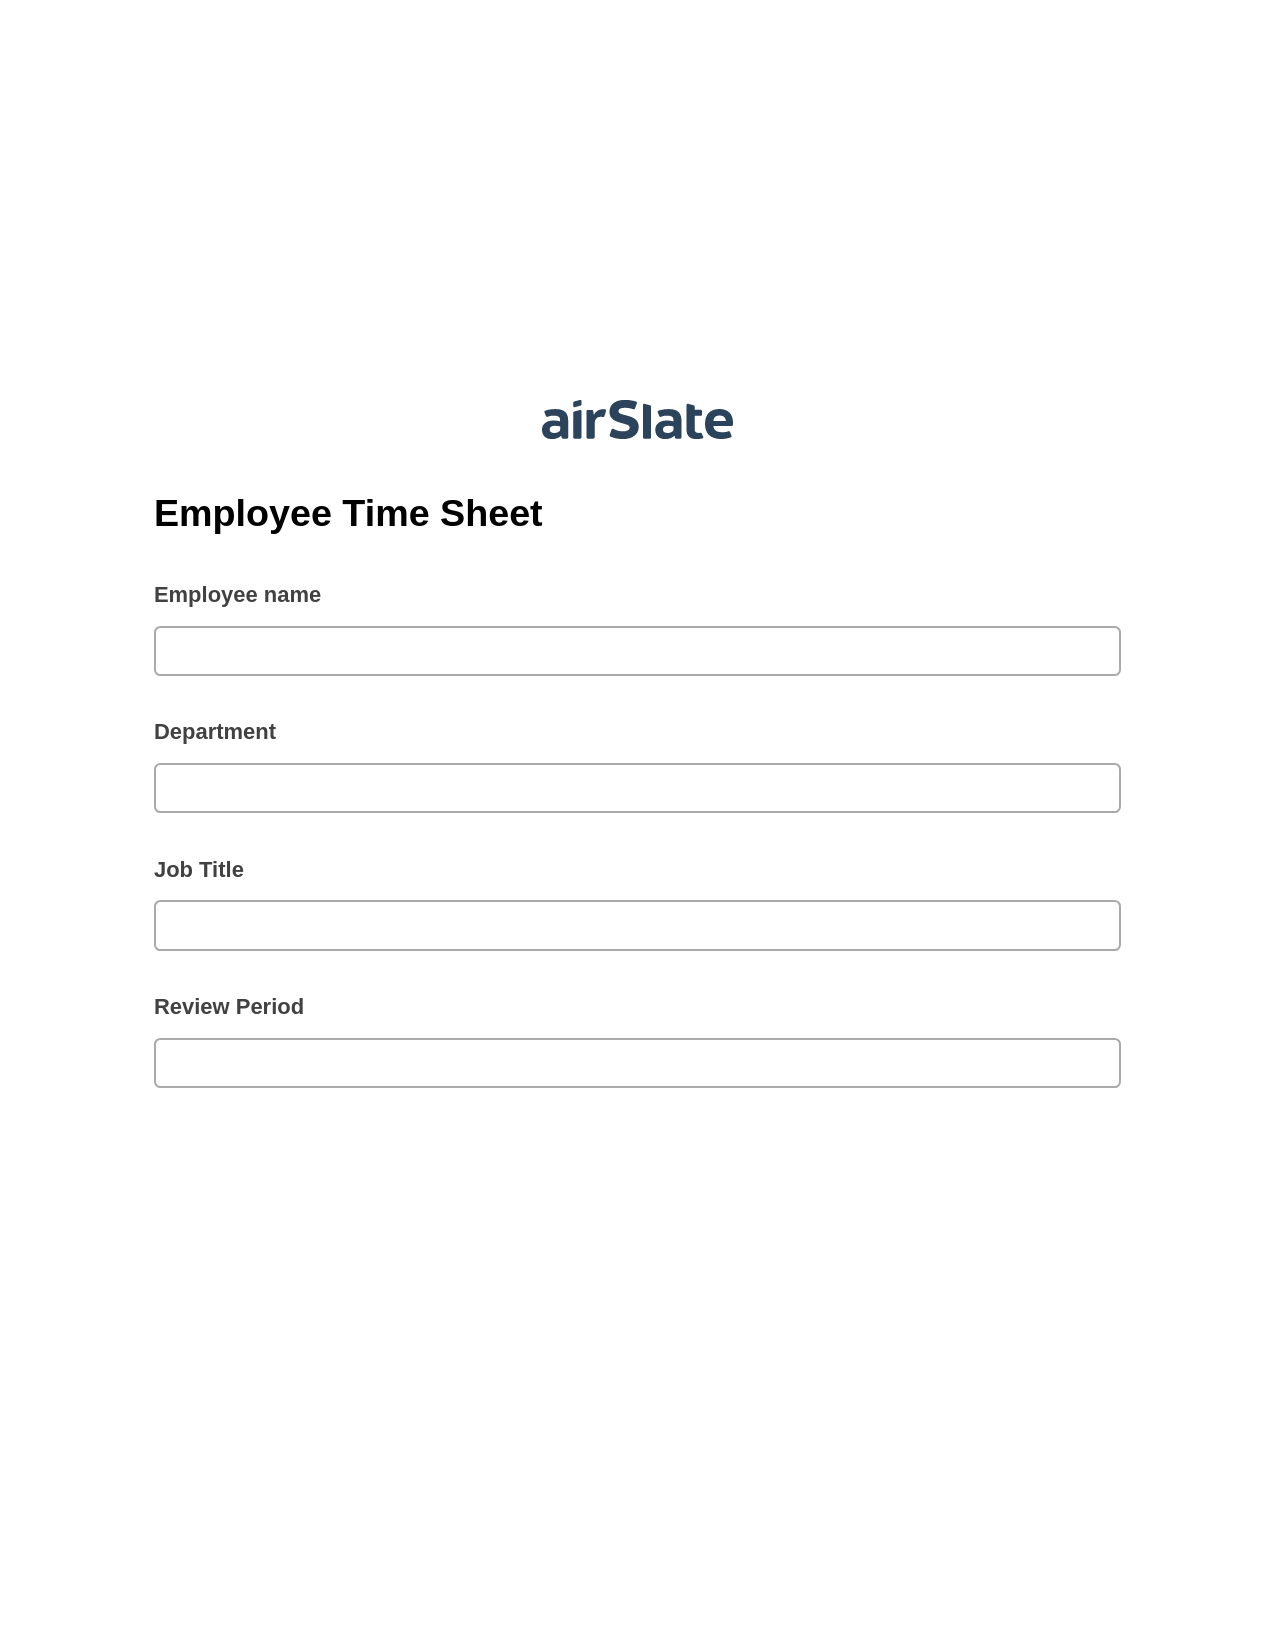 Multirole Employee Time Sheet Pre-fill from Office 365 Excel Bot, Update Audit Trail Bot, Archive to SharePoint Folder Bot